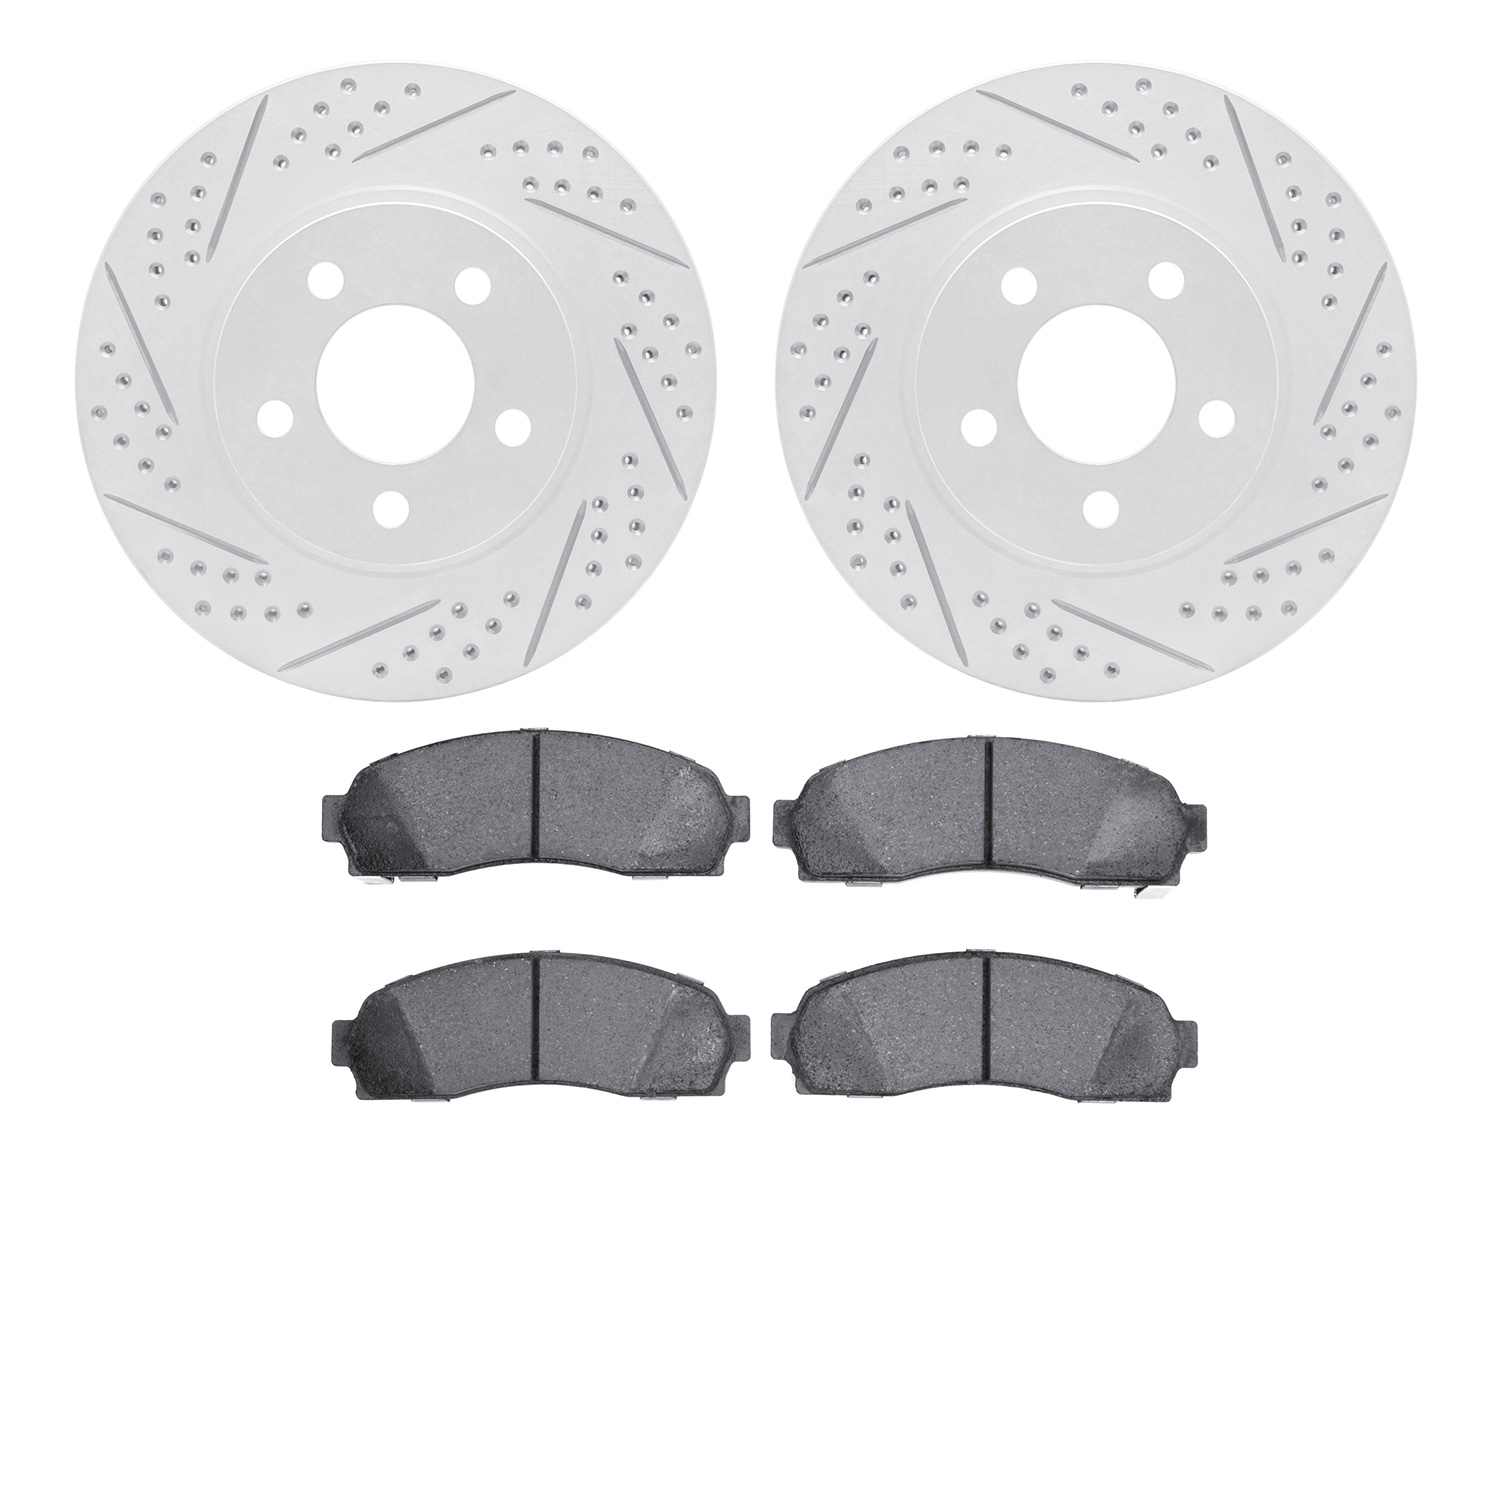 2402-54033 Geoperformance Drilled/Slotted Brake Rotors with Ultimate-Duty Brake Pads Kit, 2001-2011 Ford/Lincoln/Mercury/Mazda,